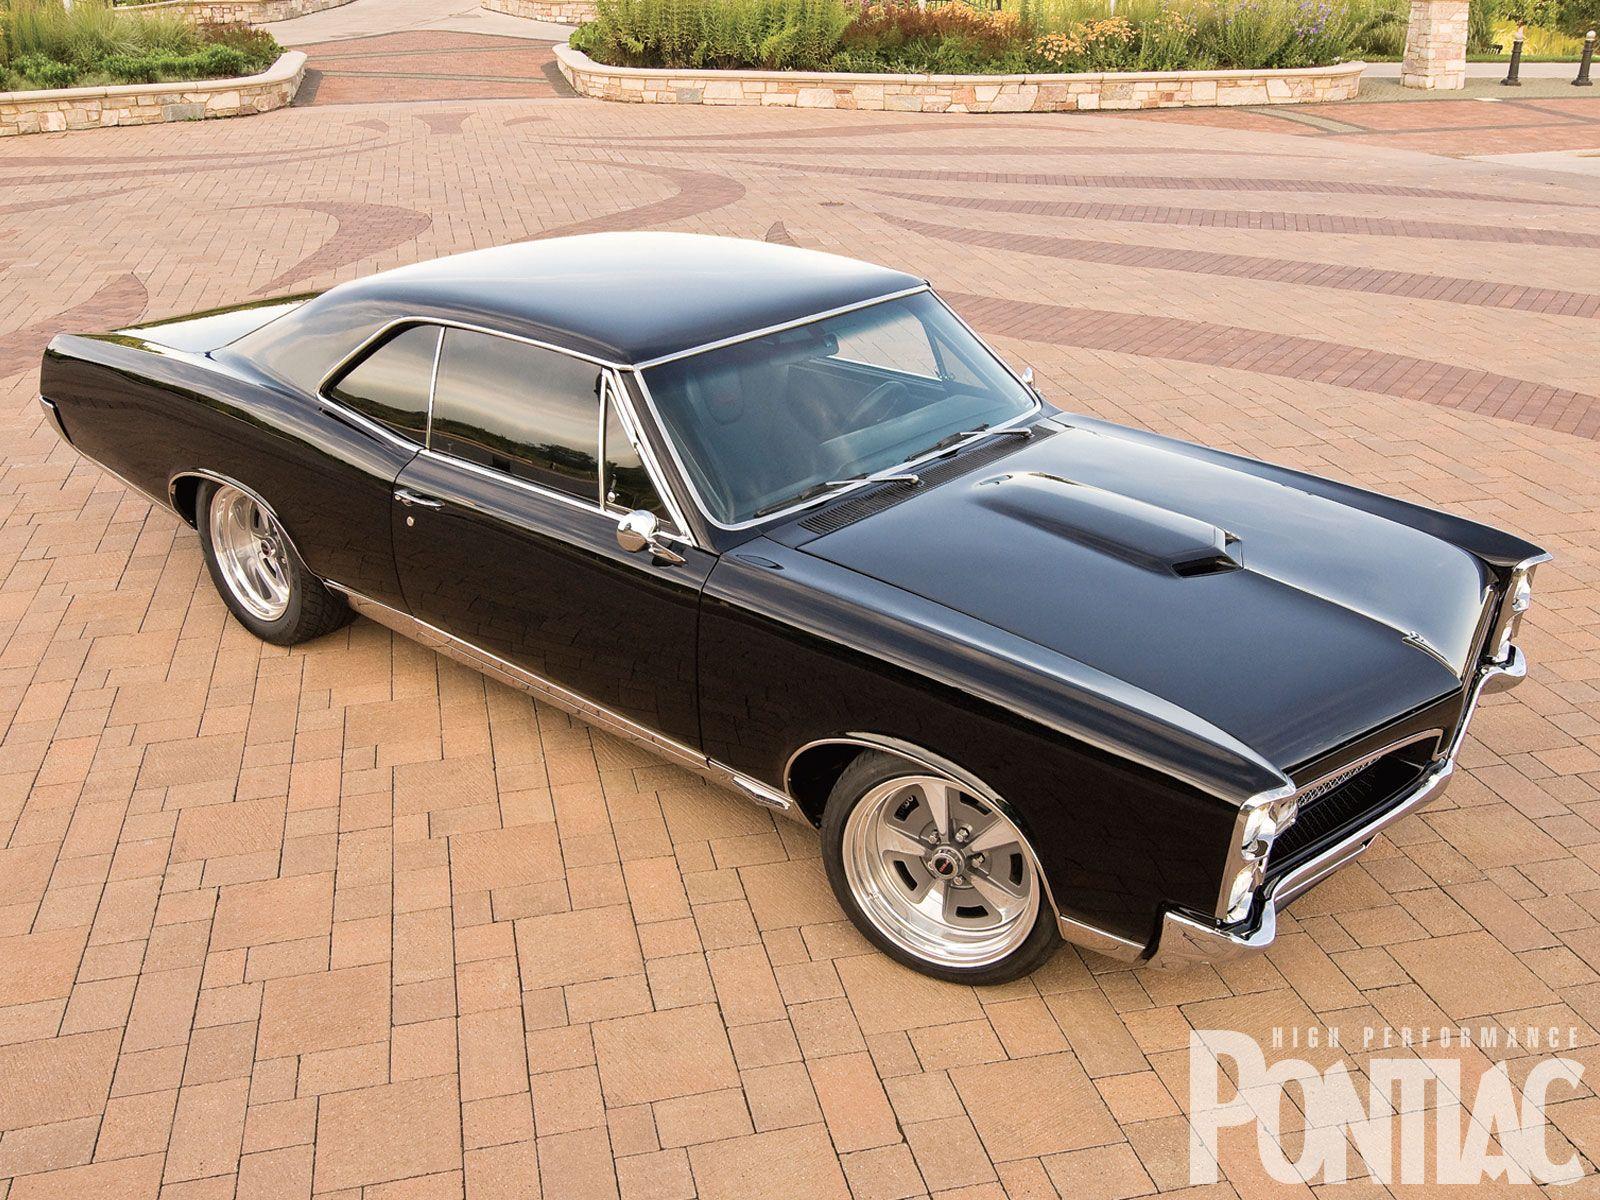 Pontiac Gto Best Image Gallery 15 And Download